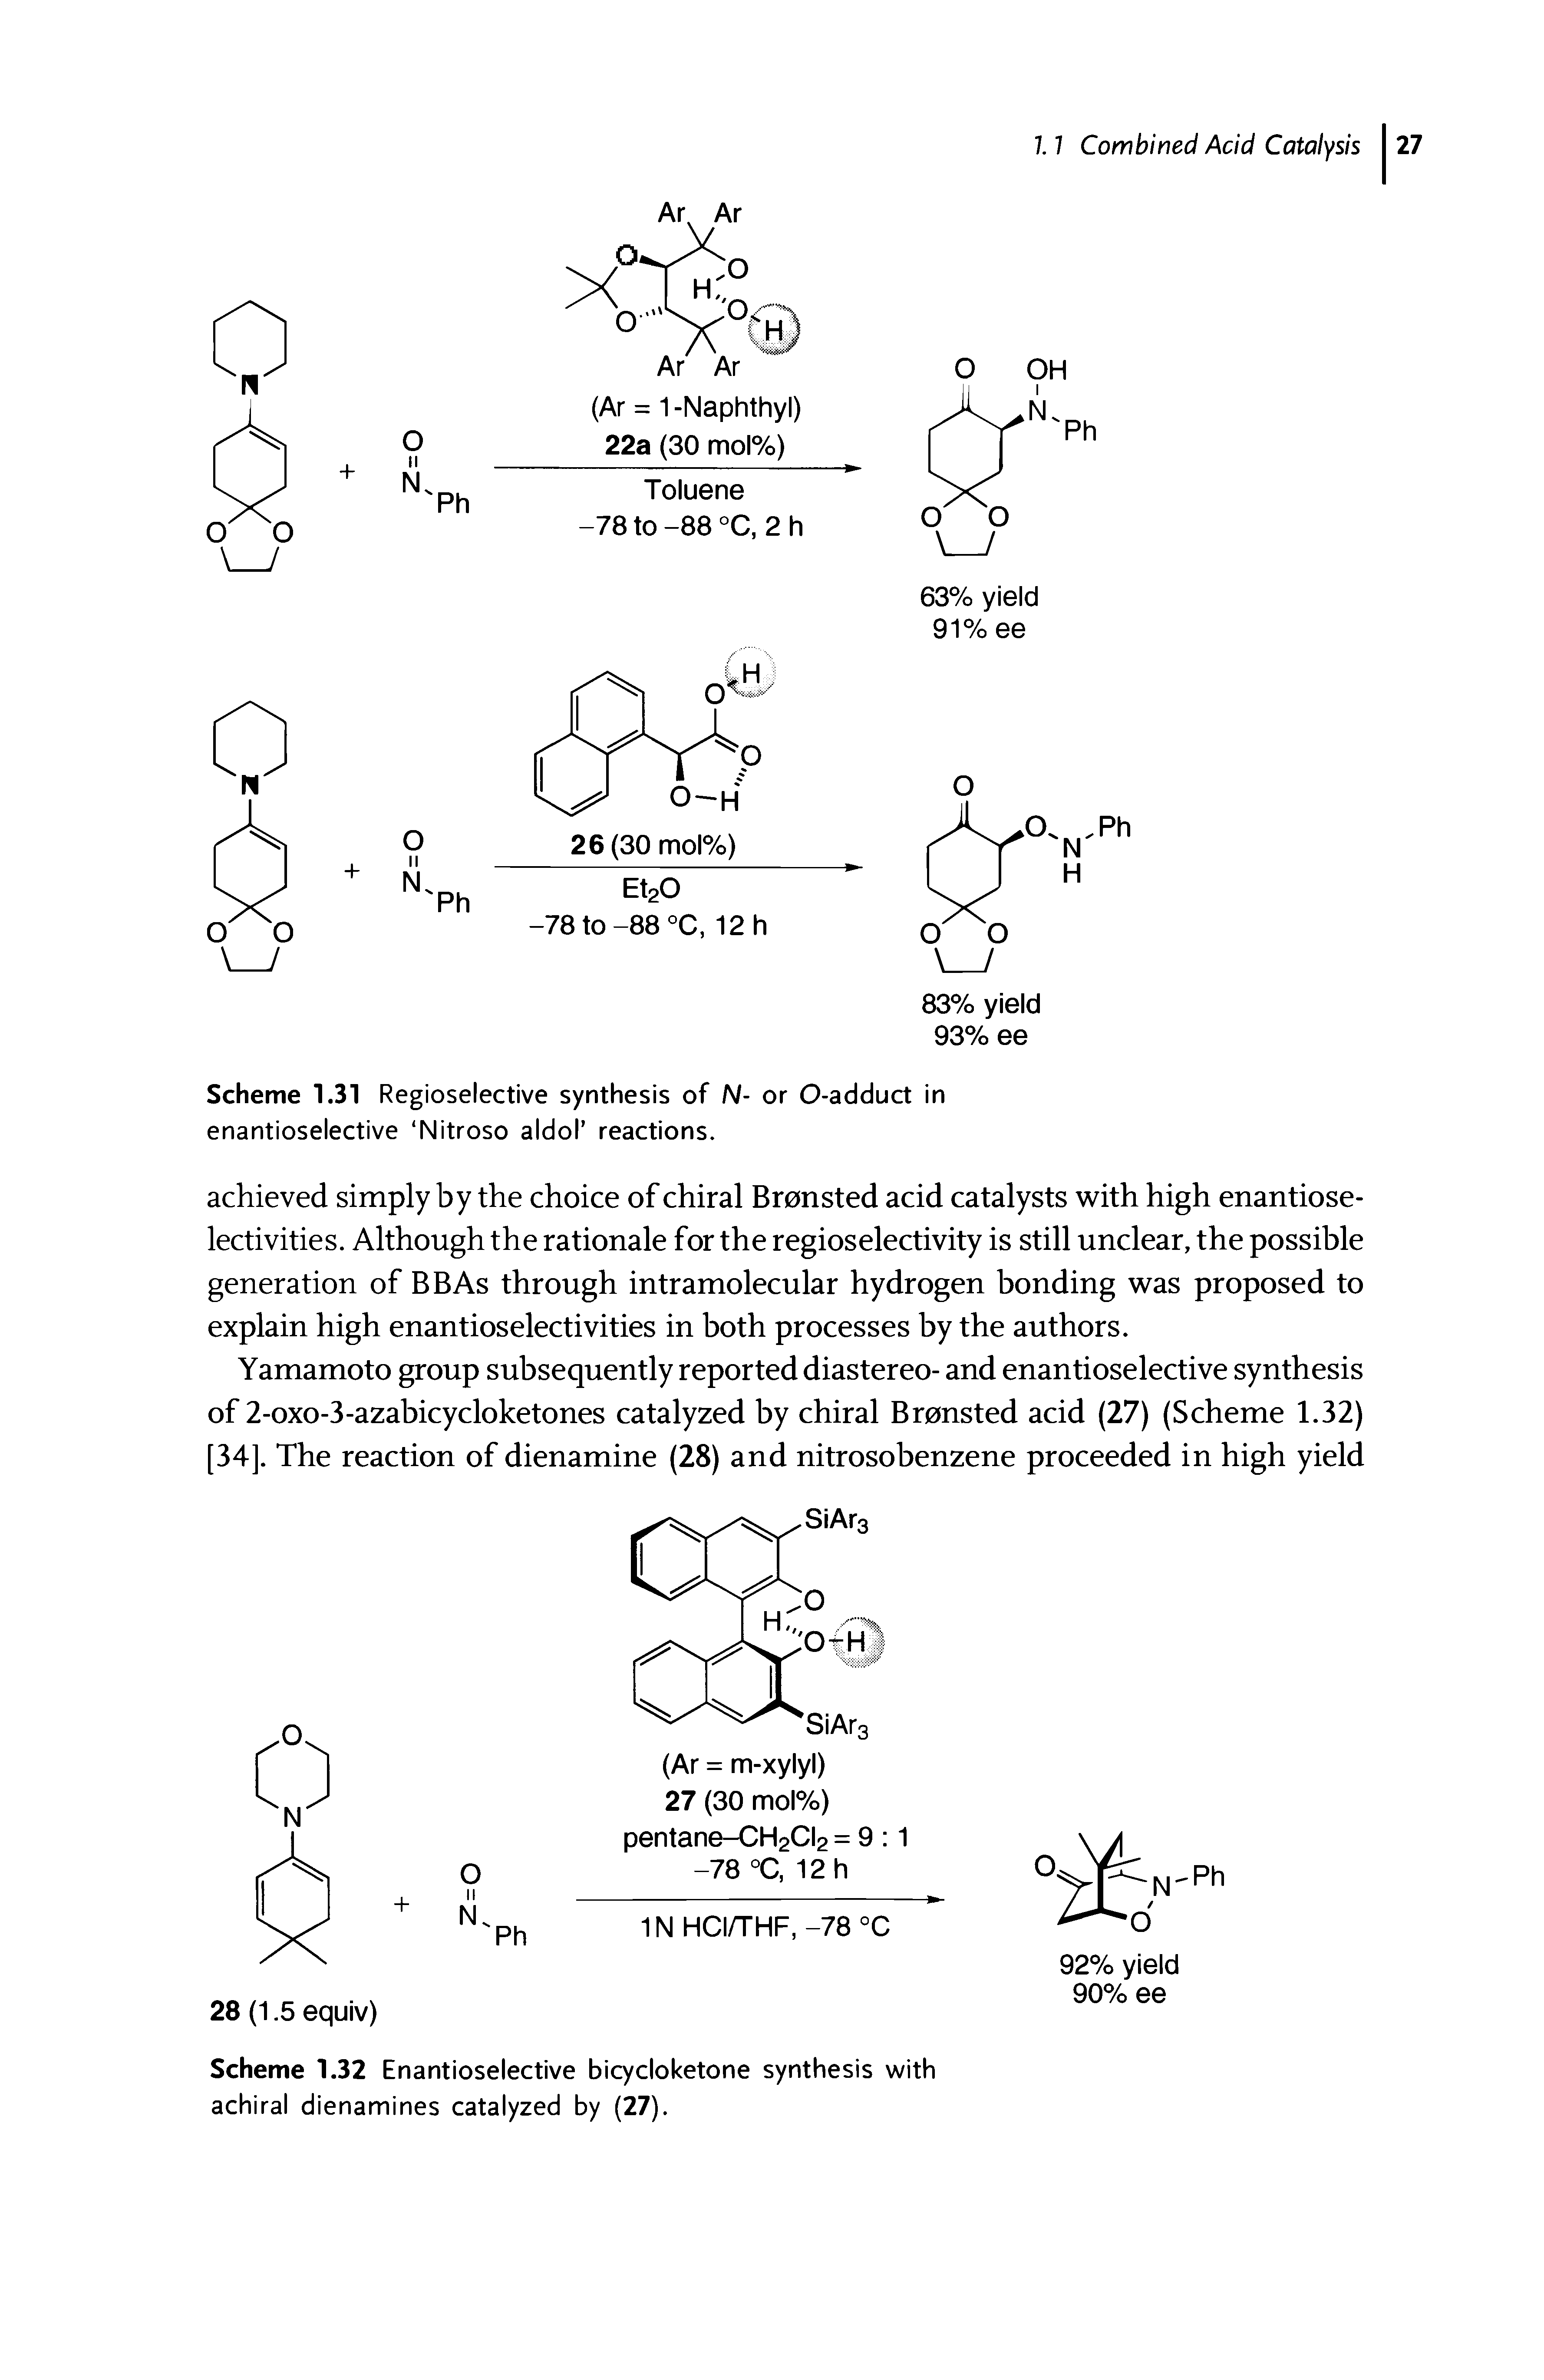 Scheme 1.31 Regioselective synthesis of N- or O-adduct in enantioselective Nitroso aldol reactions.